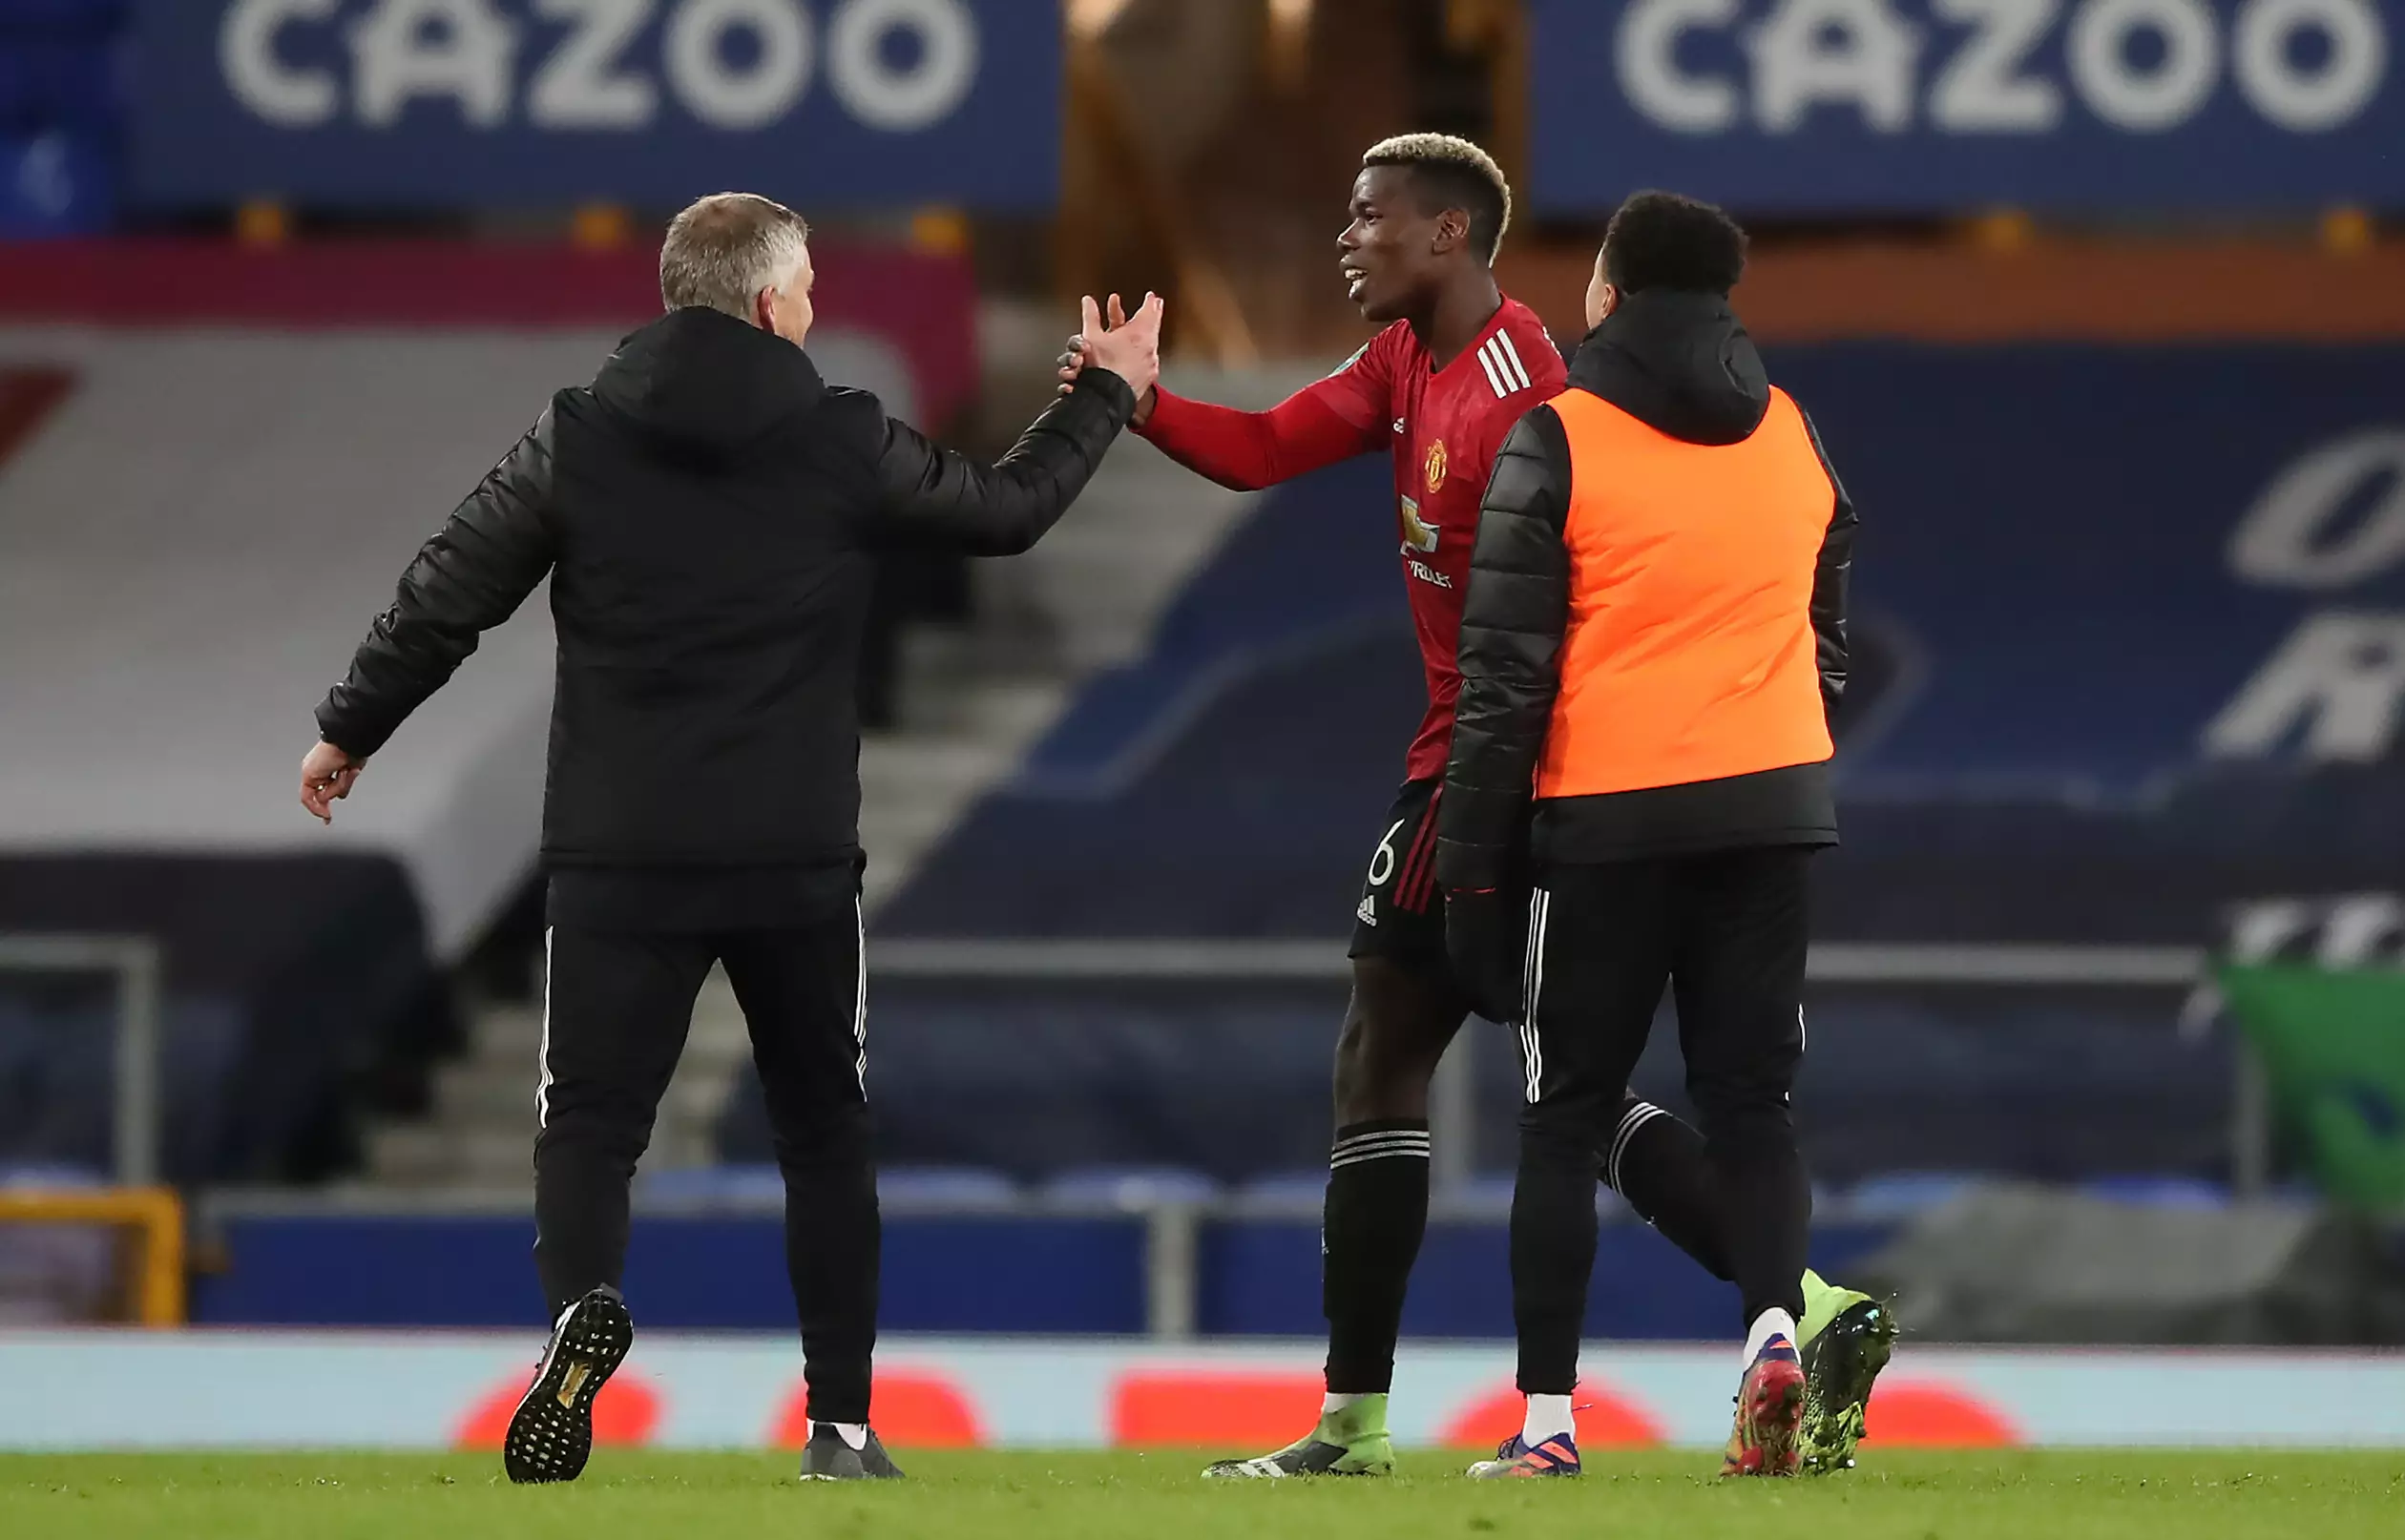 Things have definitely been improved between Solskjaer and Pogba. Image: PA Images